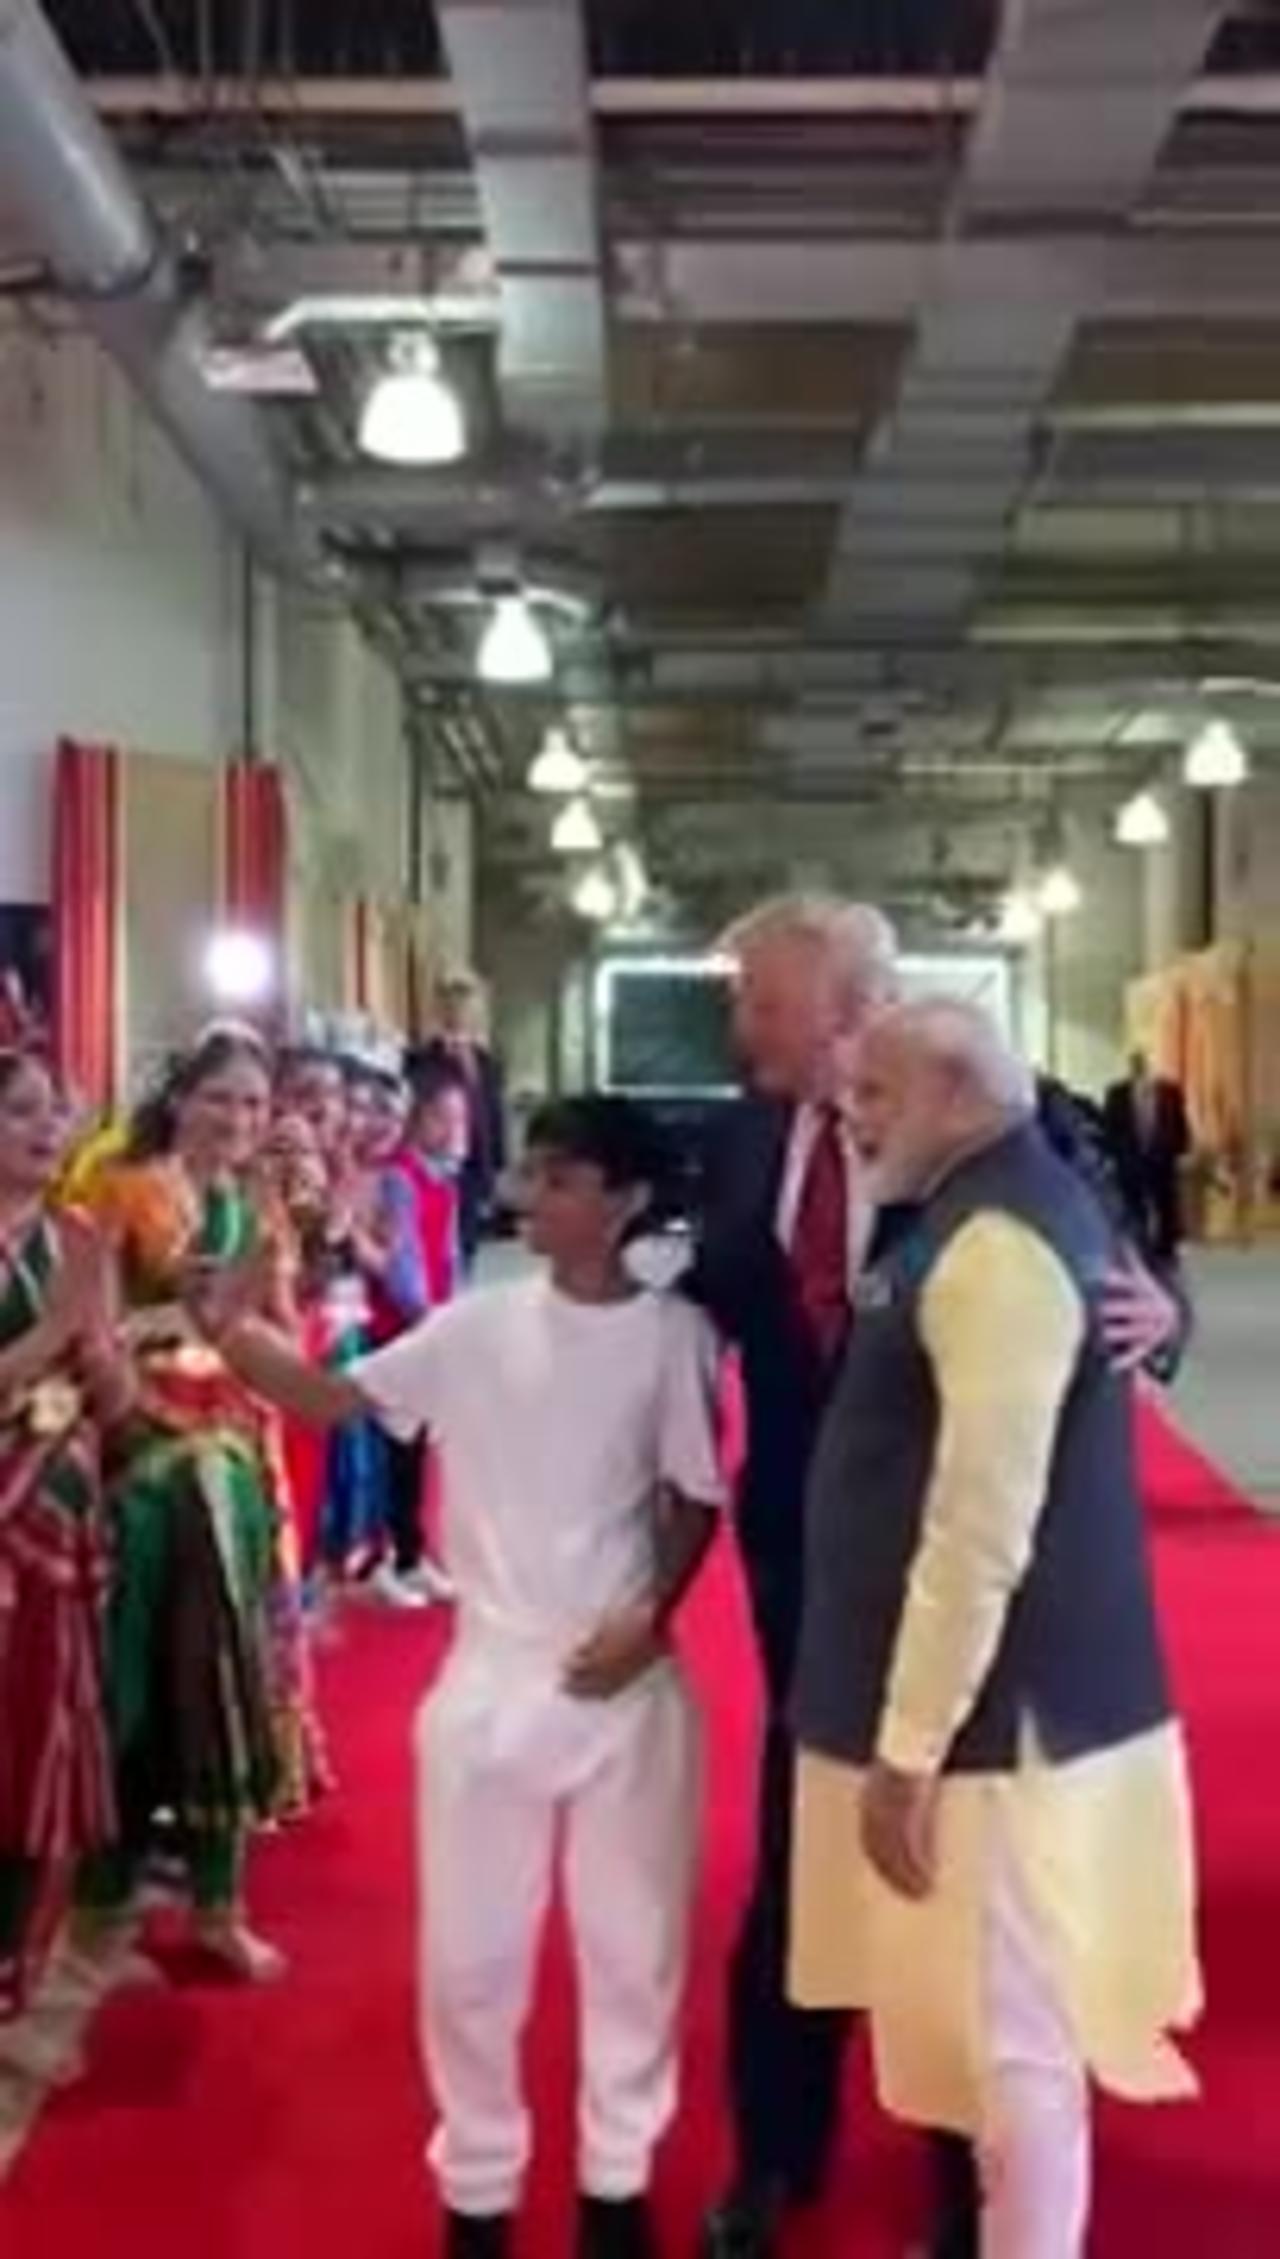 PM Modi & President Trump interacted with a group of youngsters at during HowdyModi event